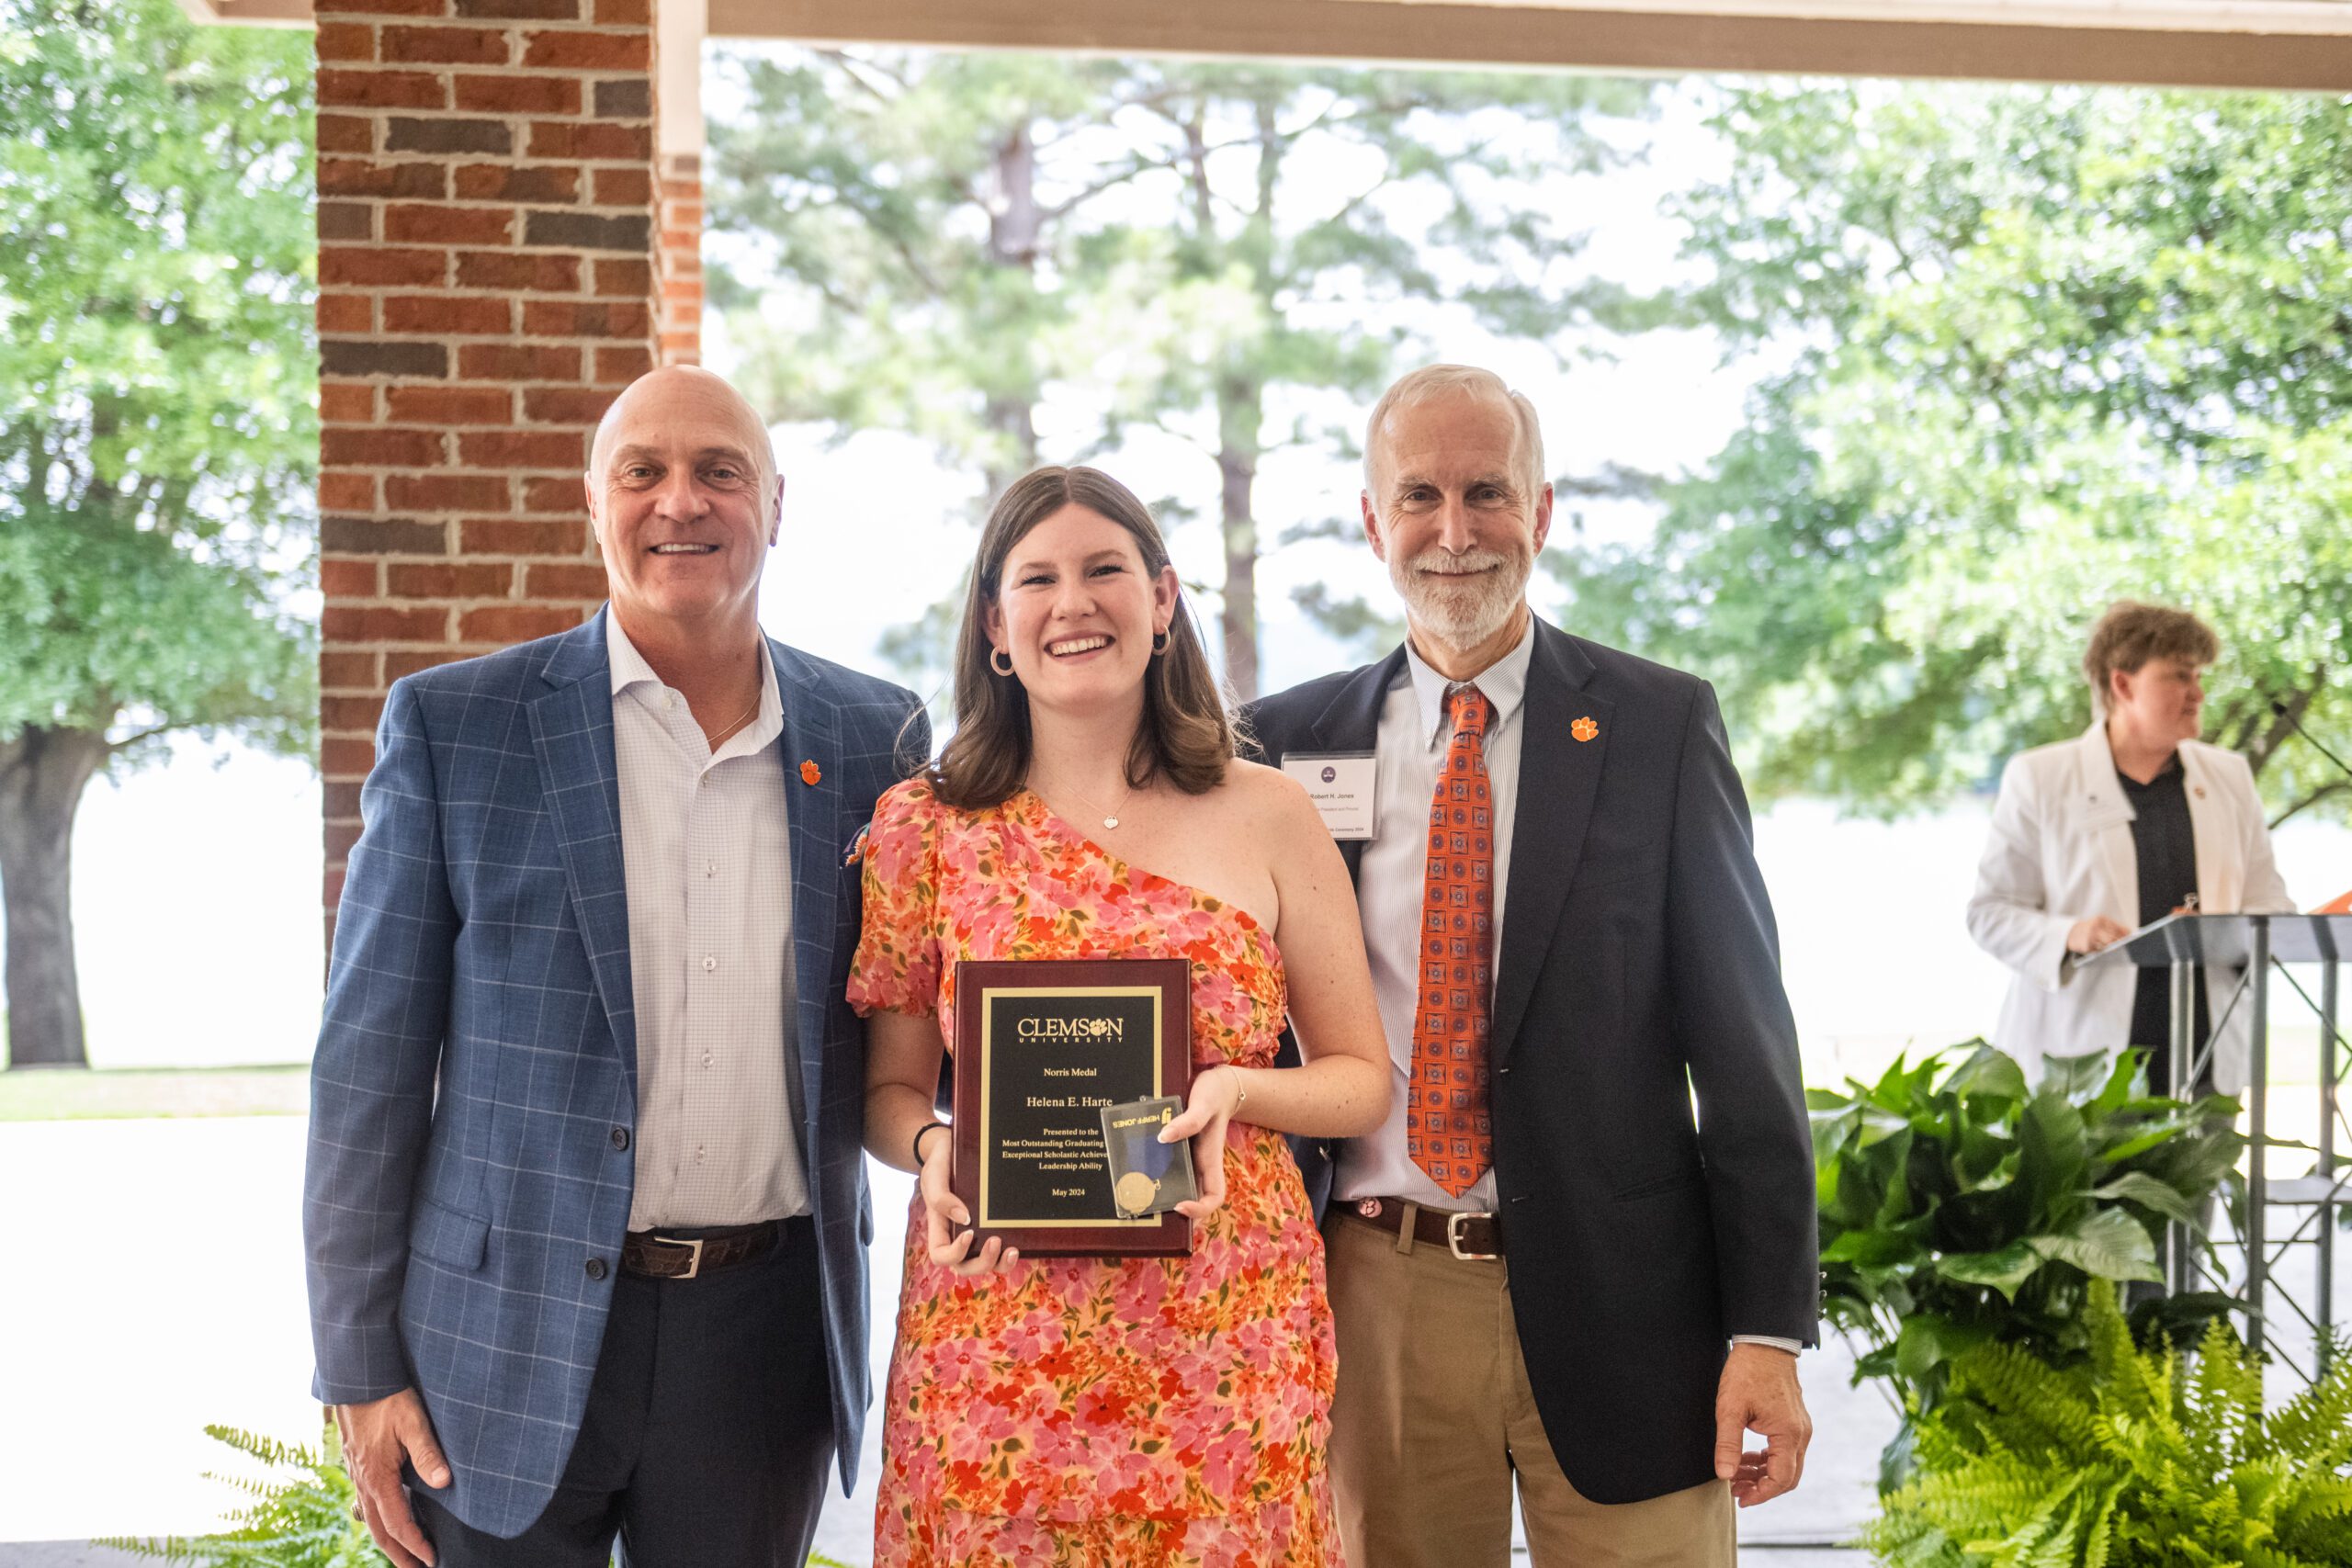 Clemson President Jim Clements poses for a picture with Norris Medal recipient Helena Harte and Provost Bob Jones.